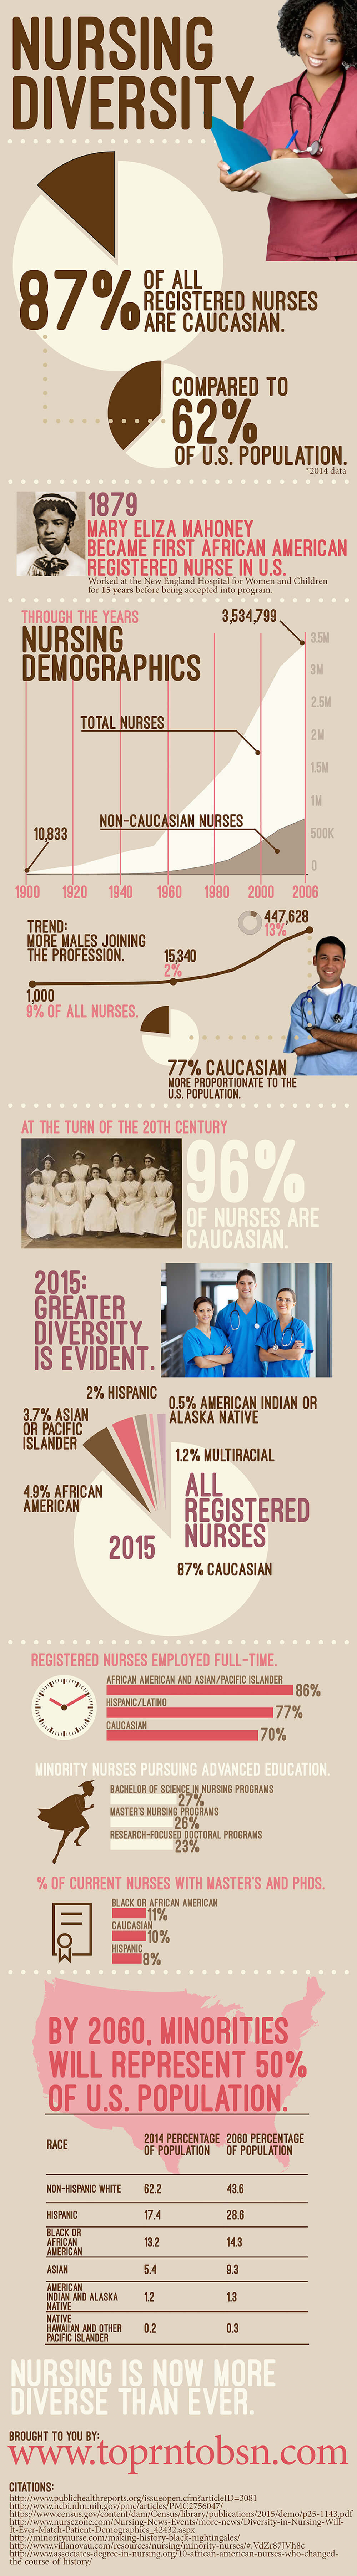 How Diverse is The Nursing Industry?